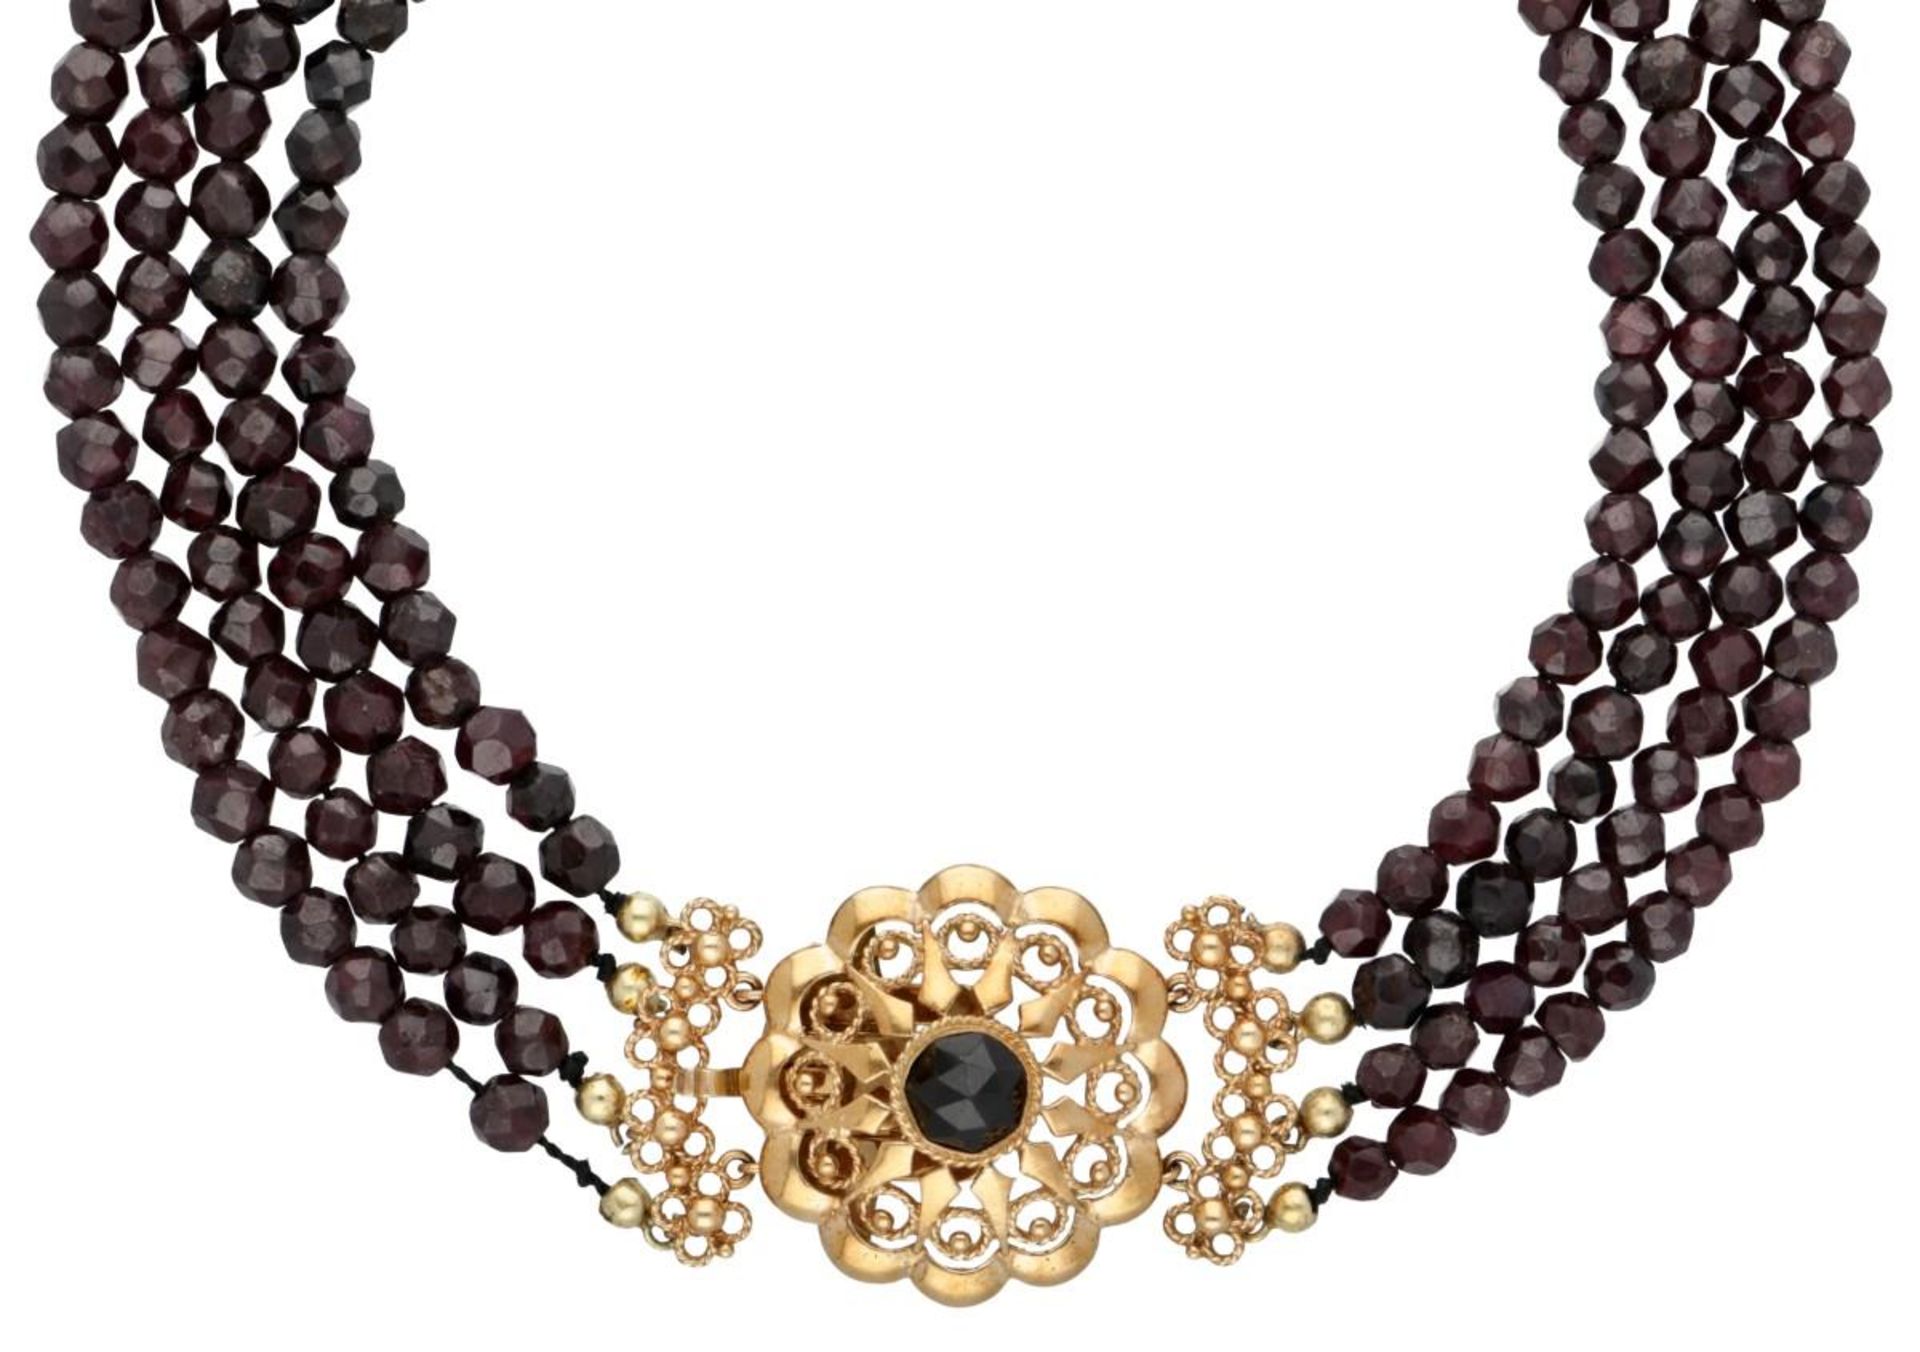 Three-row garnet necklace with a 14K. yellow gold closure.